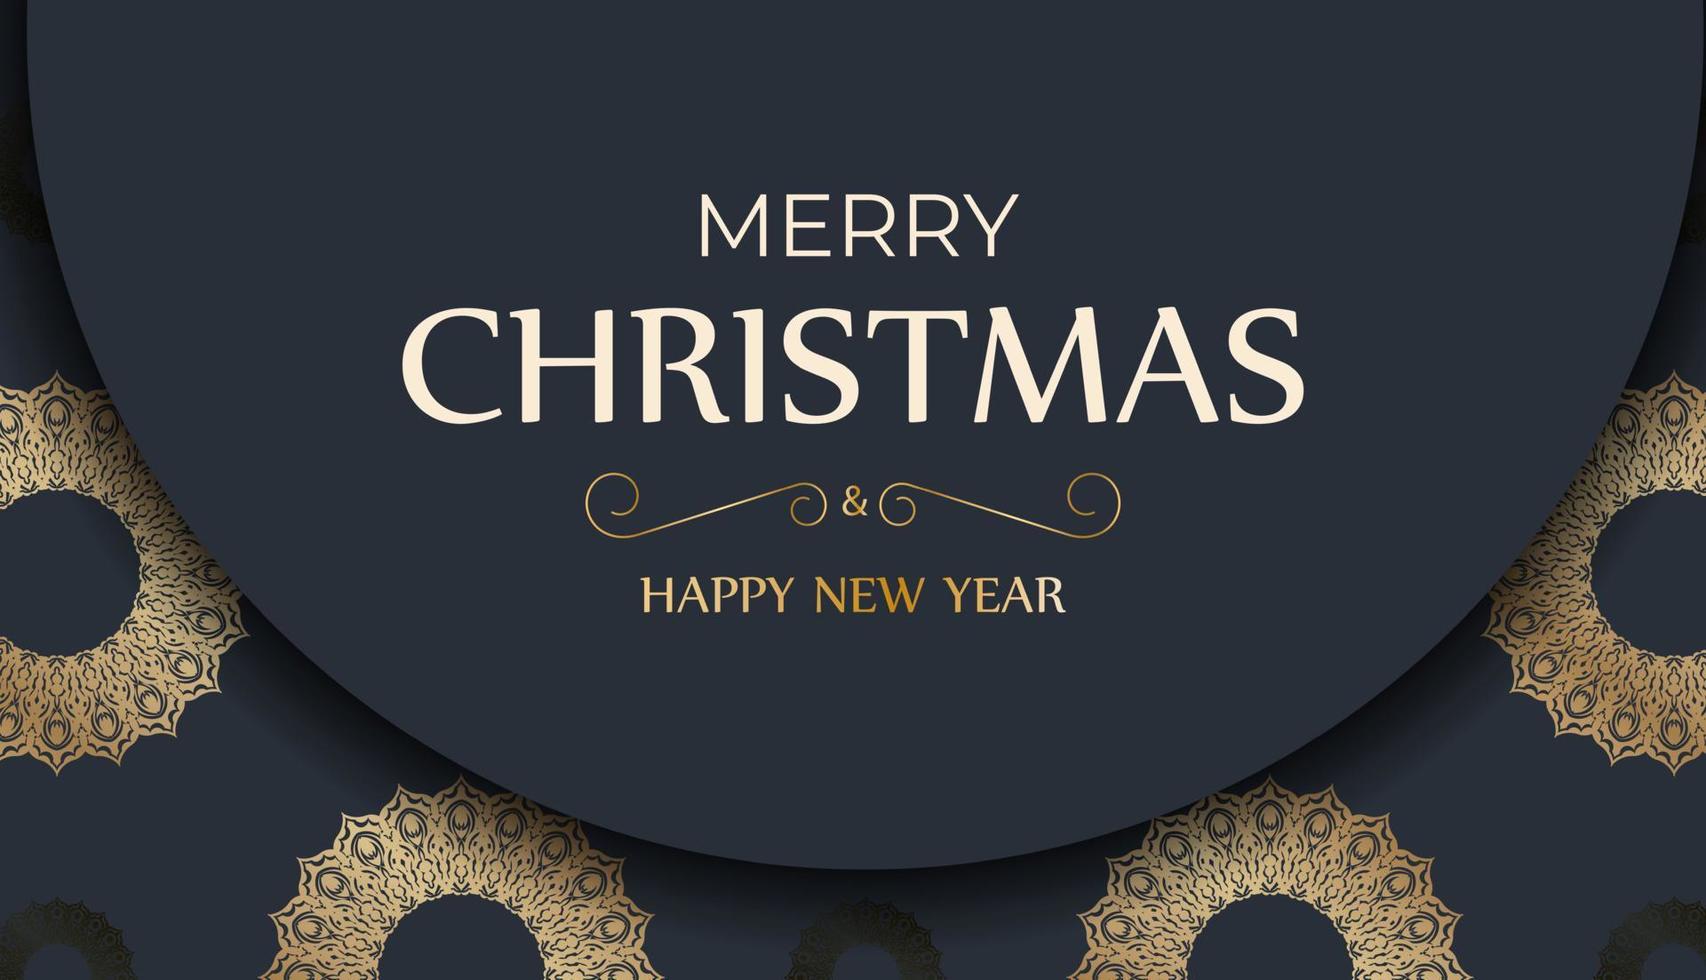 Template Greeting card Merry Christmas in dark blue color with luxury gold ornaments vector